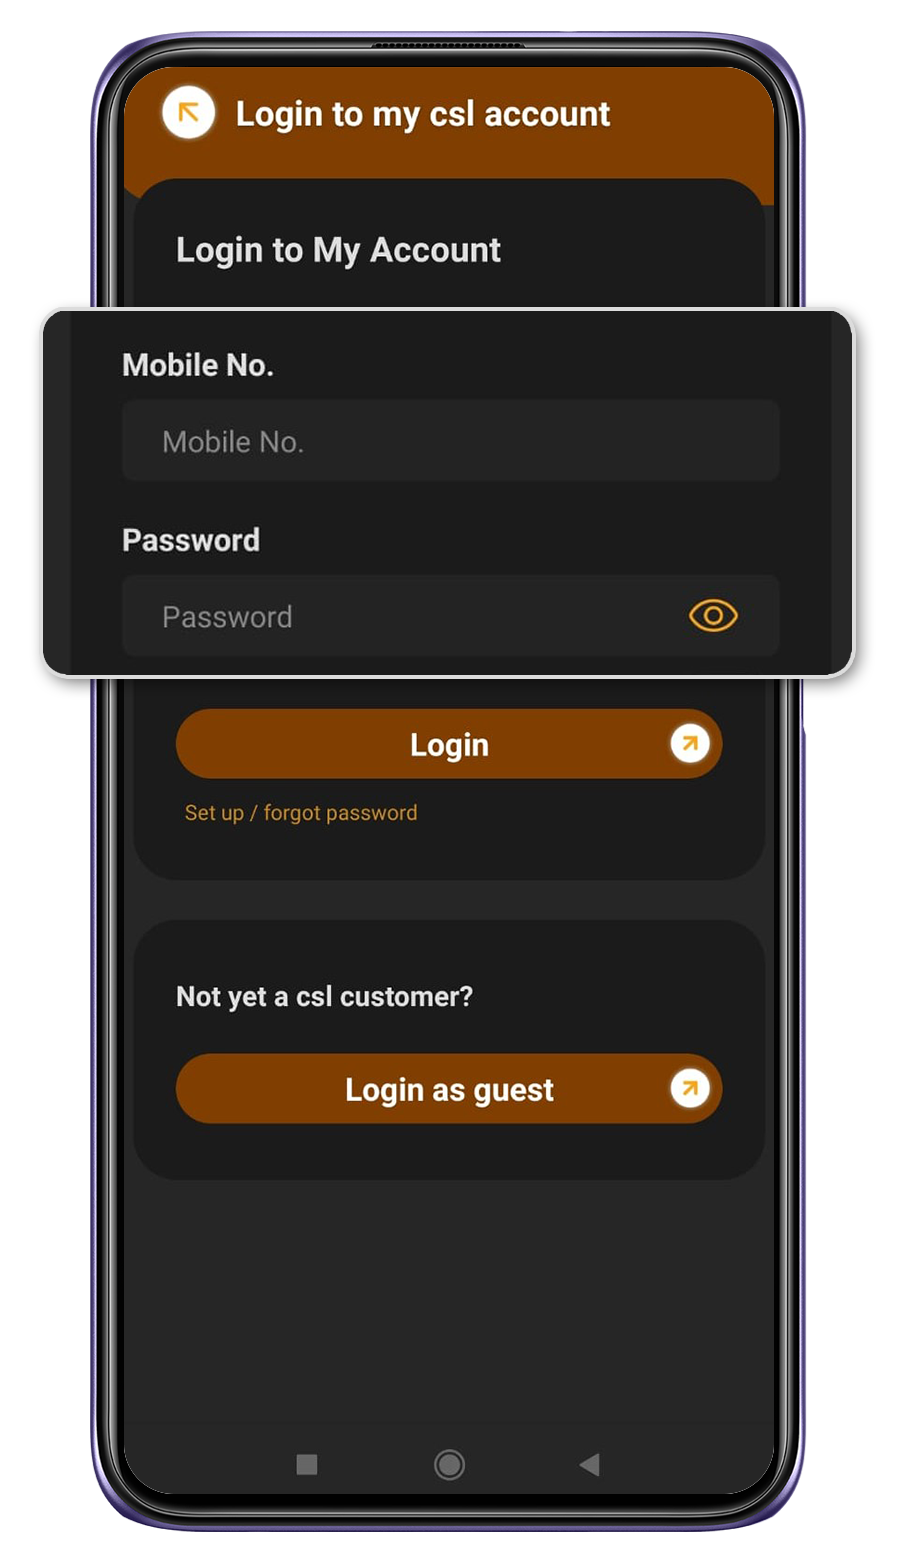 3. Enter Mobile No. and password to login